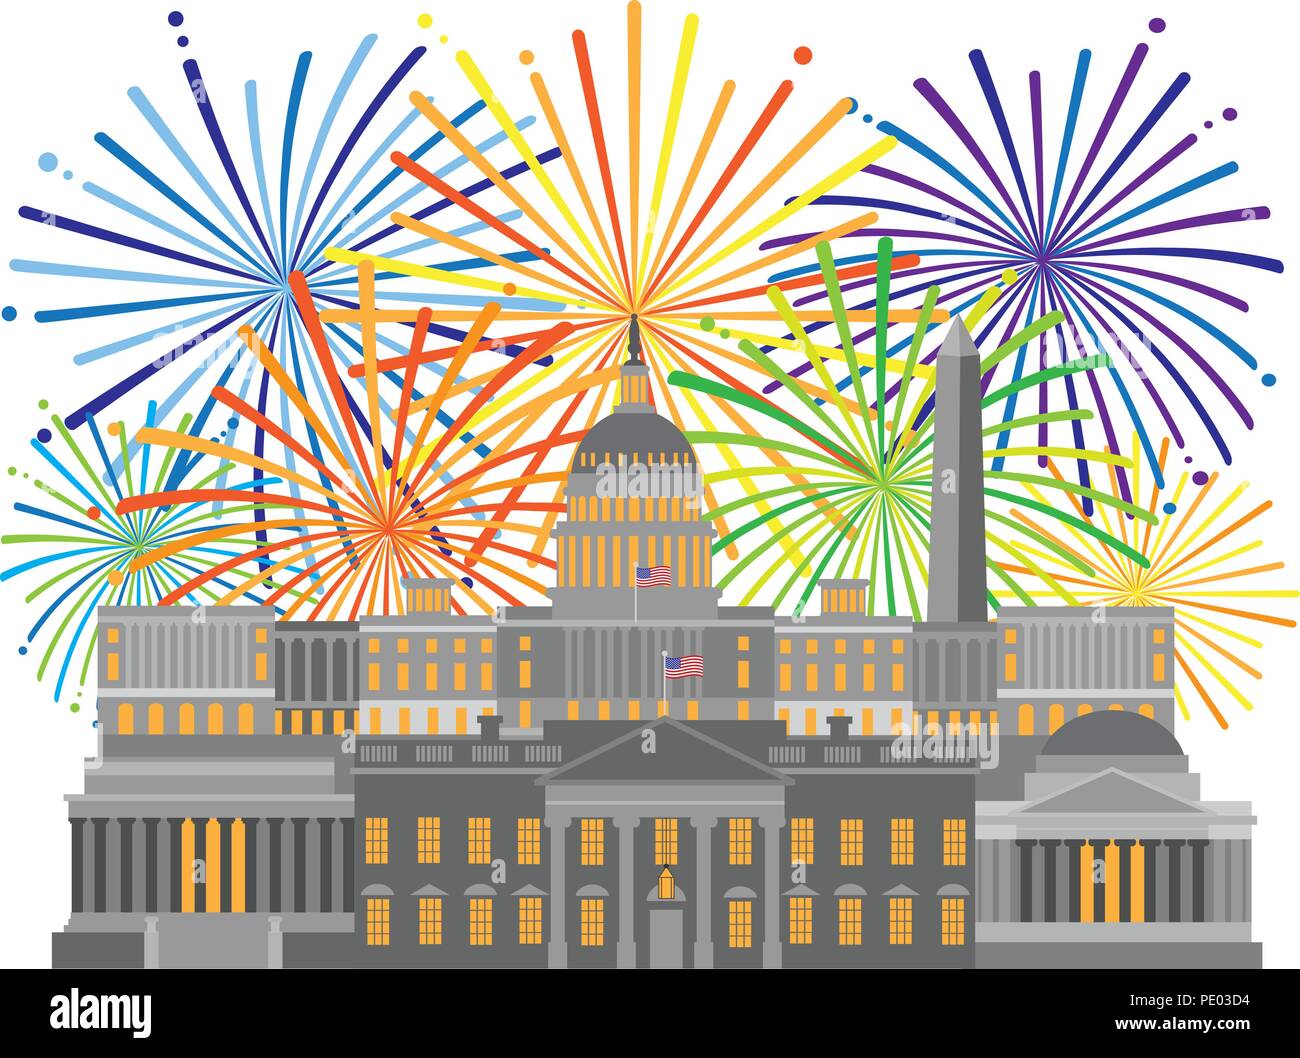 Fireworks over Washington DC Monuments Landmarks Capitol and Memorials Collage Isolated on White background Illustration Stock Vector